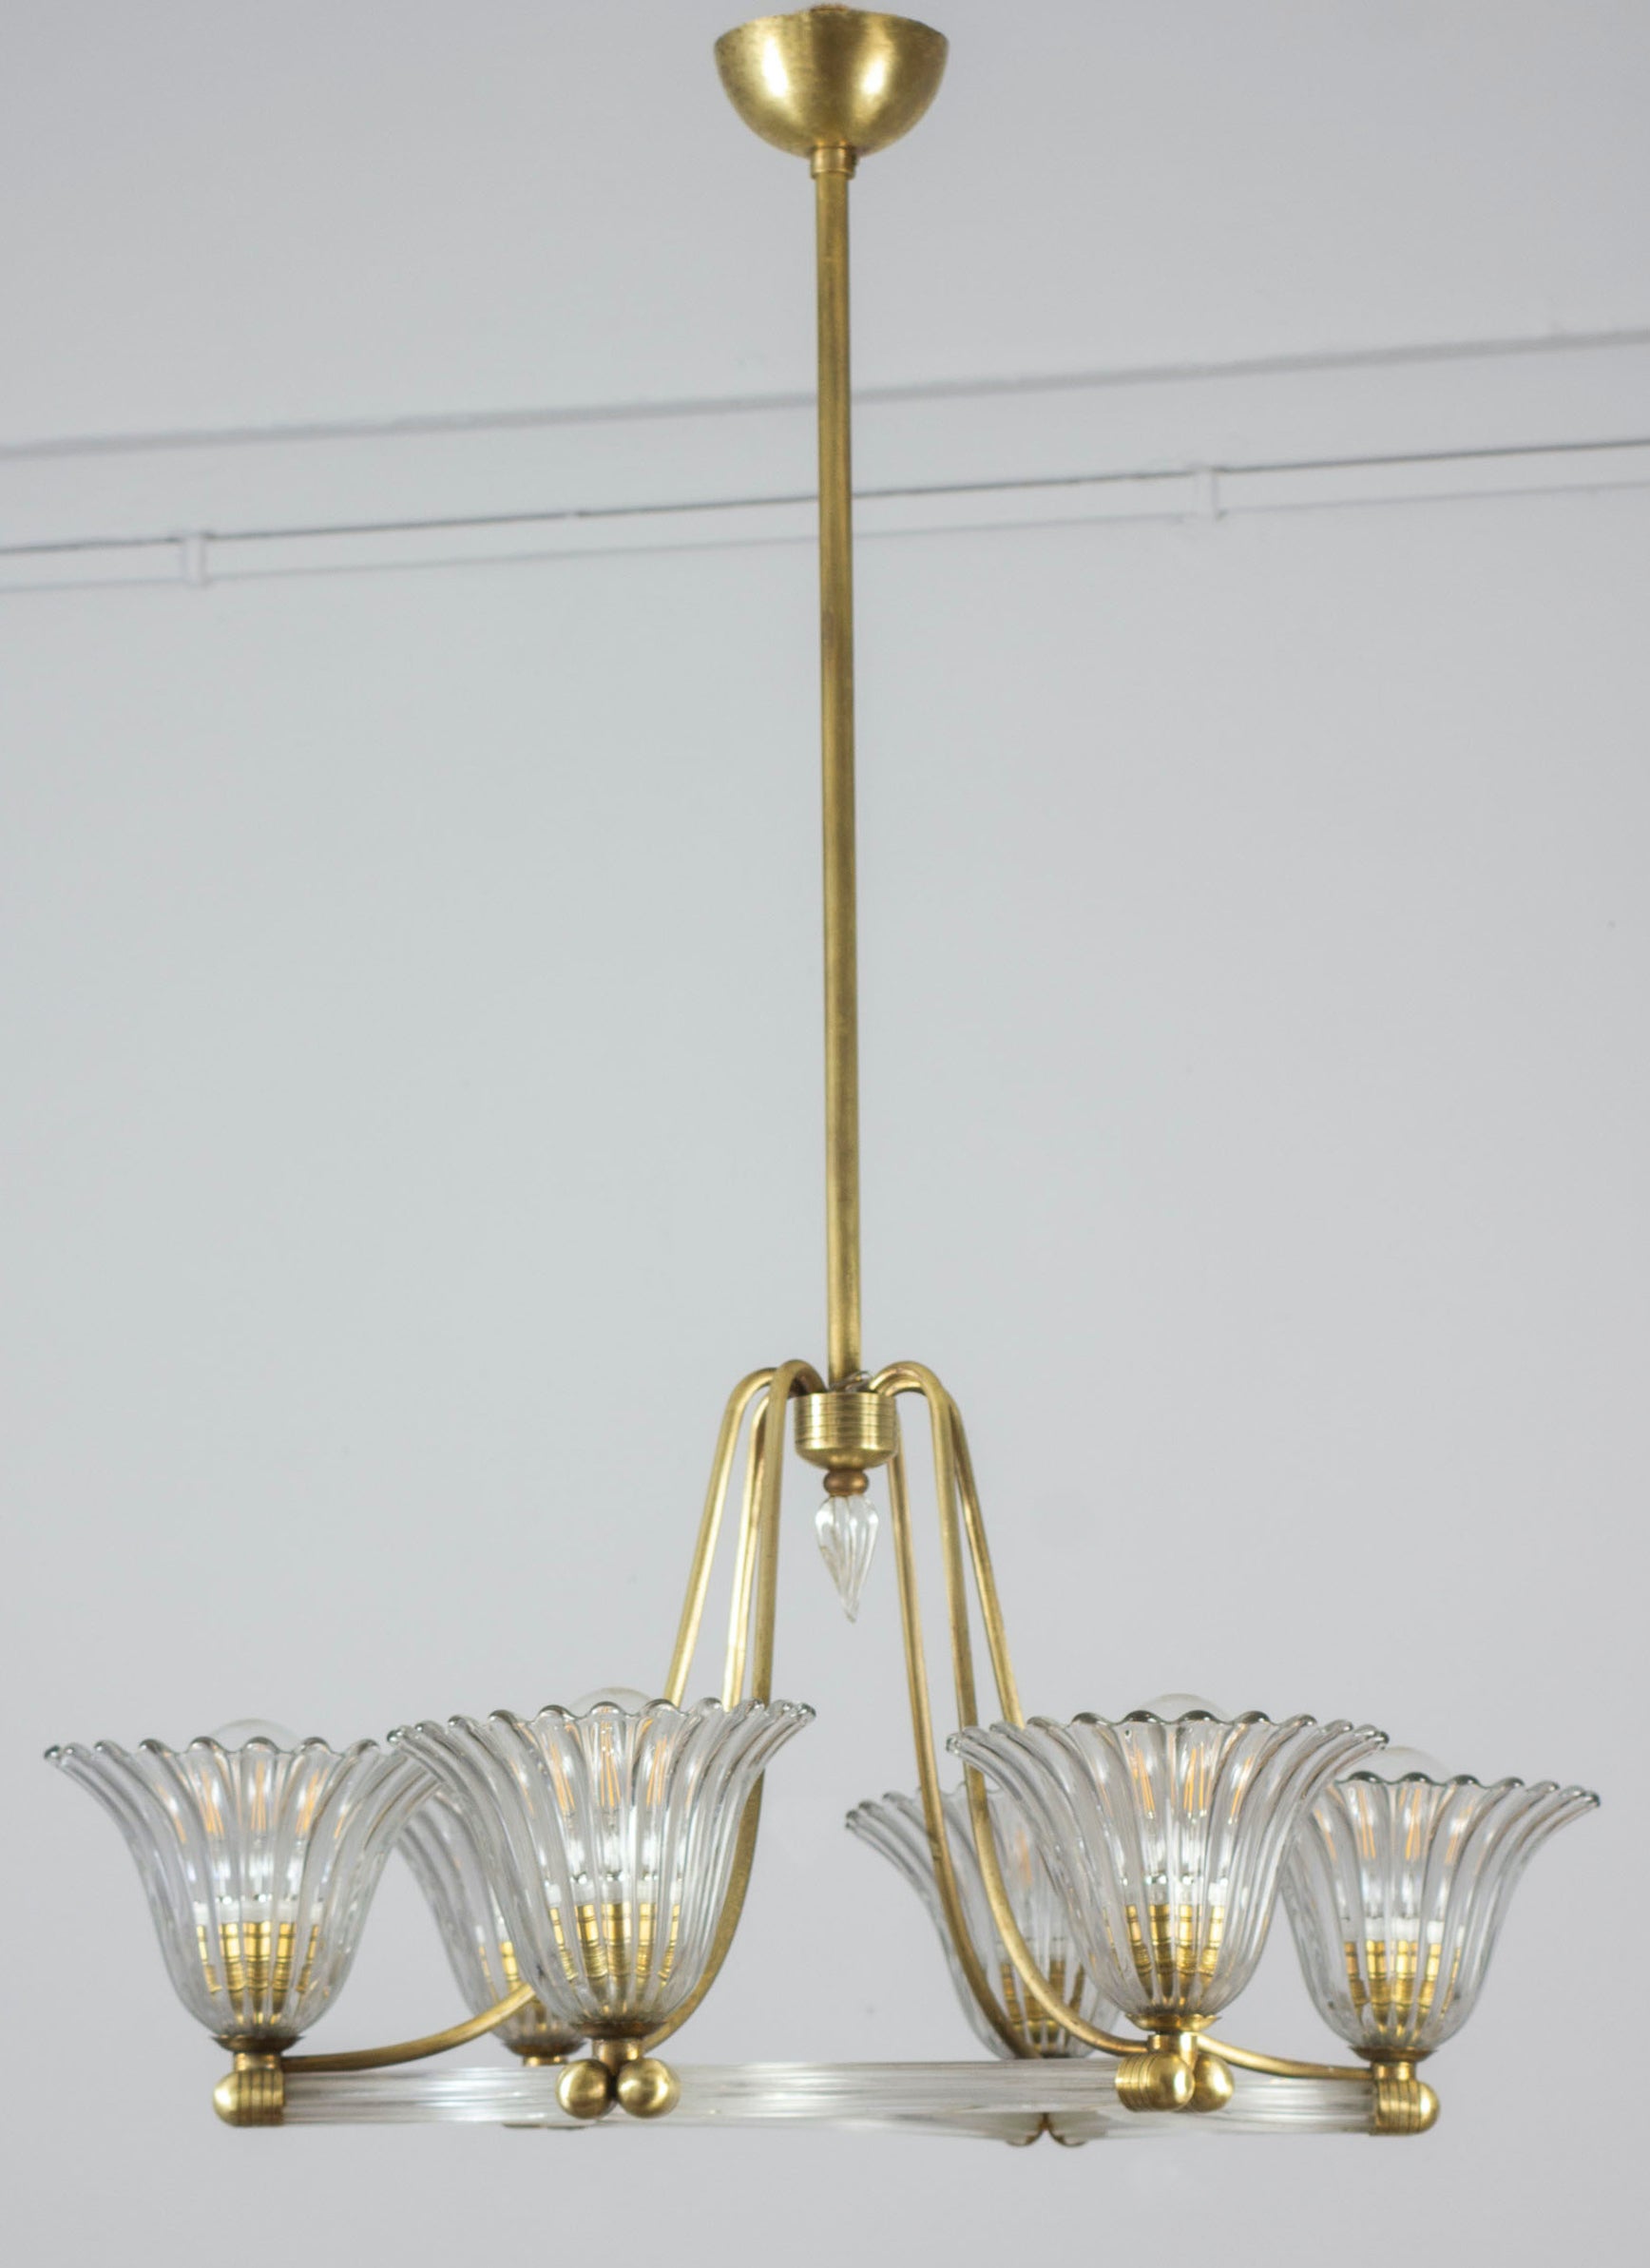 Exceptional six-shade Murano glass chandelier with elegant shaped brass mount, by Ercole Barovier.
Excellent vintage condition.
Six E 27 light bulbs compatible with US standards.
 The height of the brass rod can be shortened on request.
Cleaned and